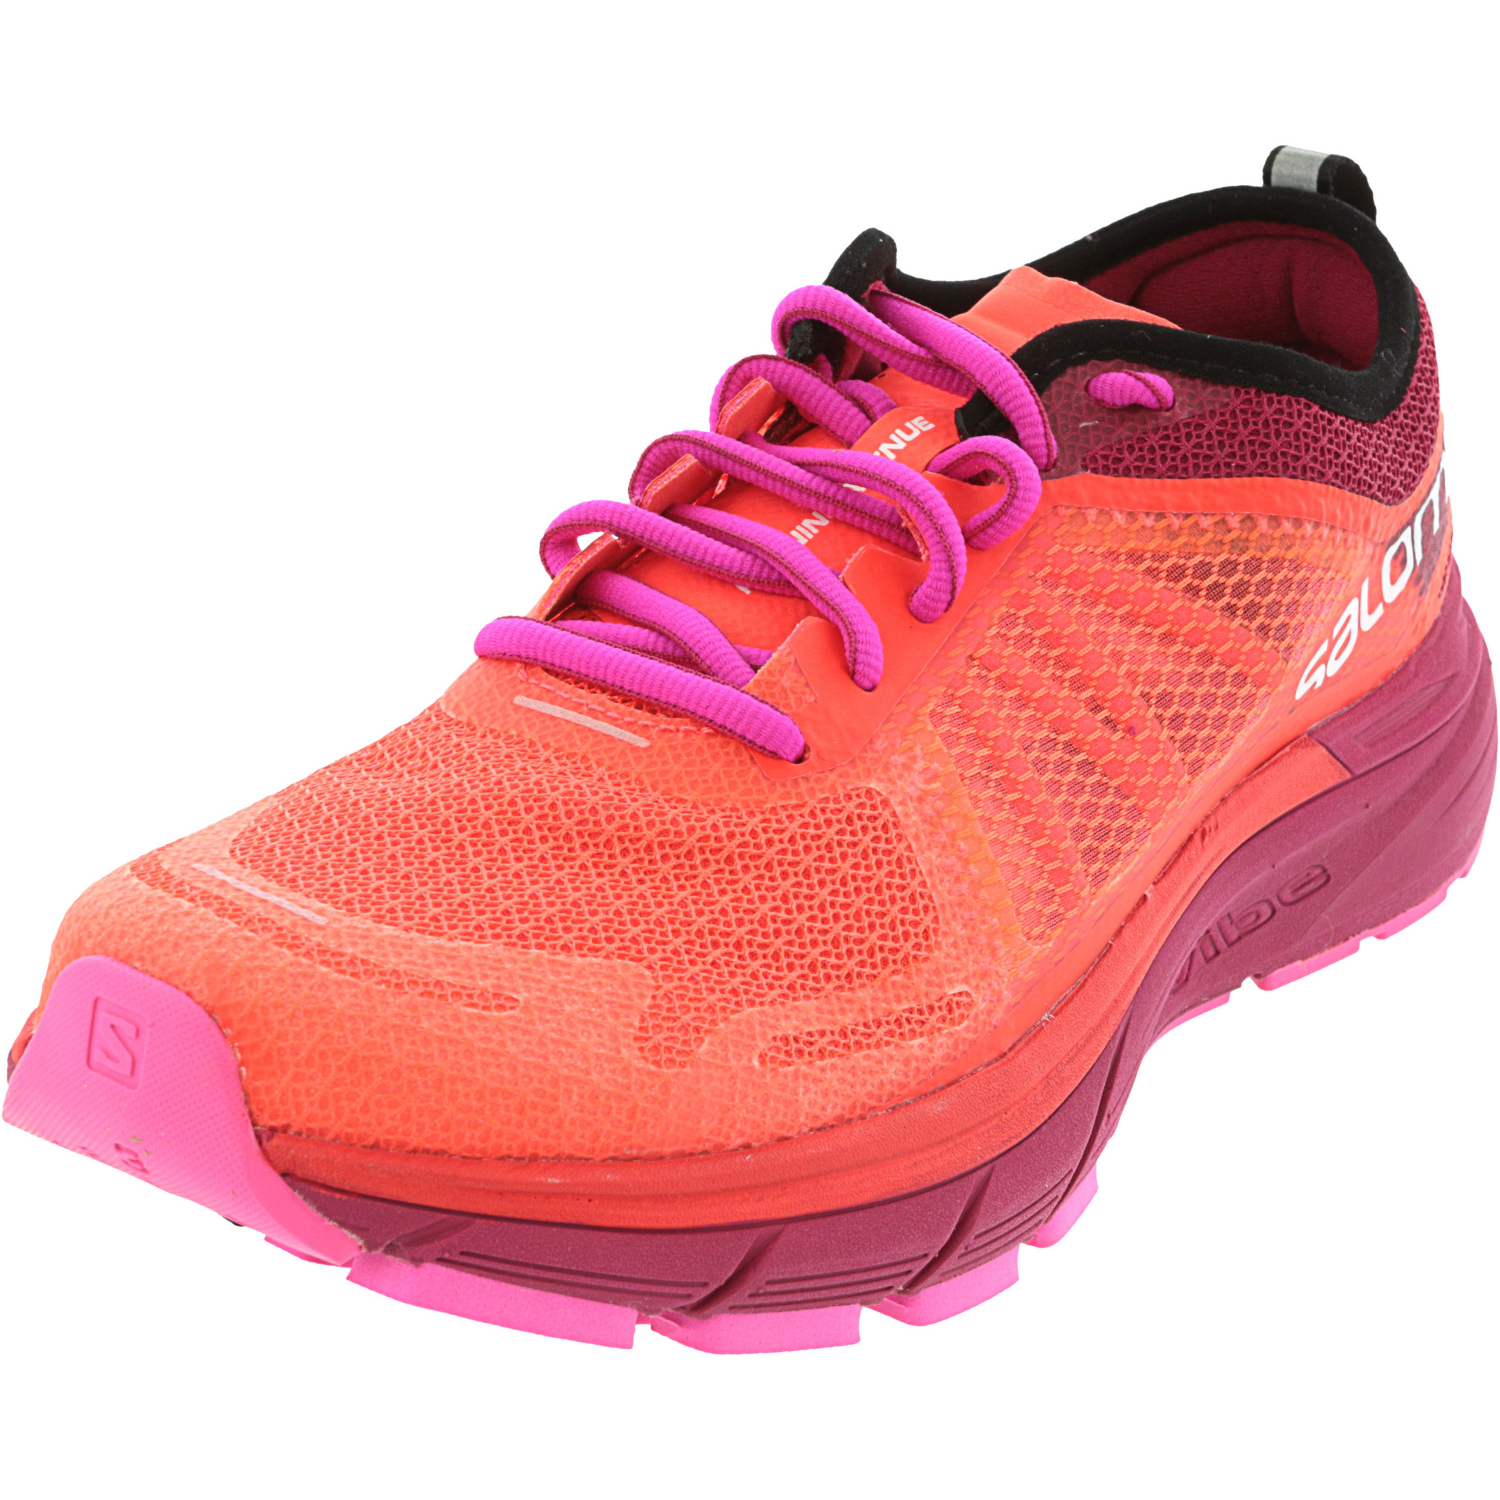 gym sports shoes for womens